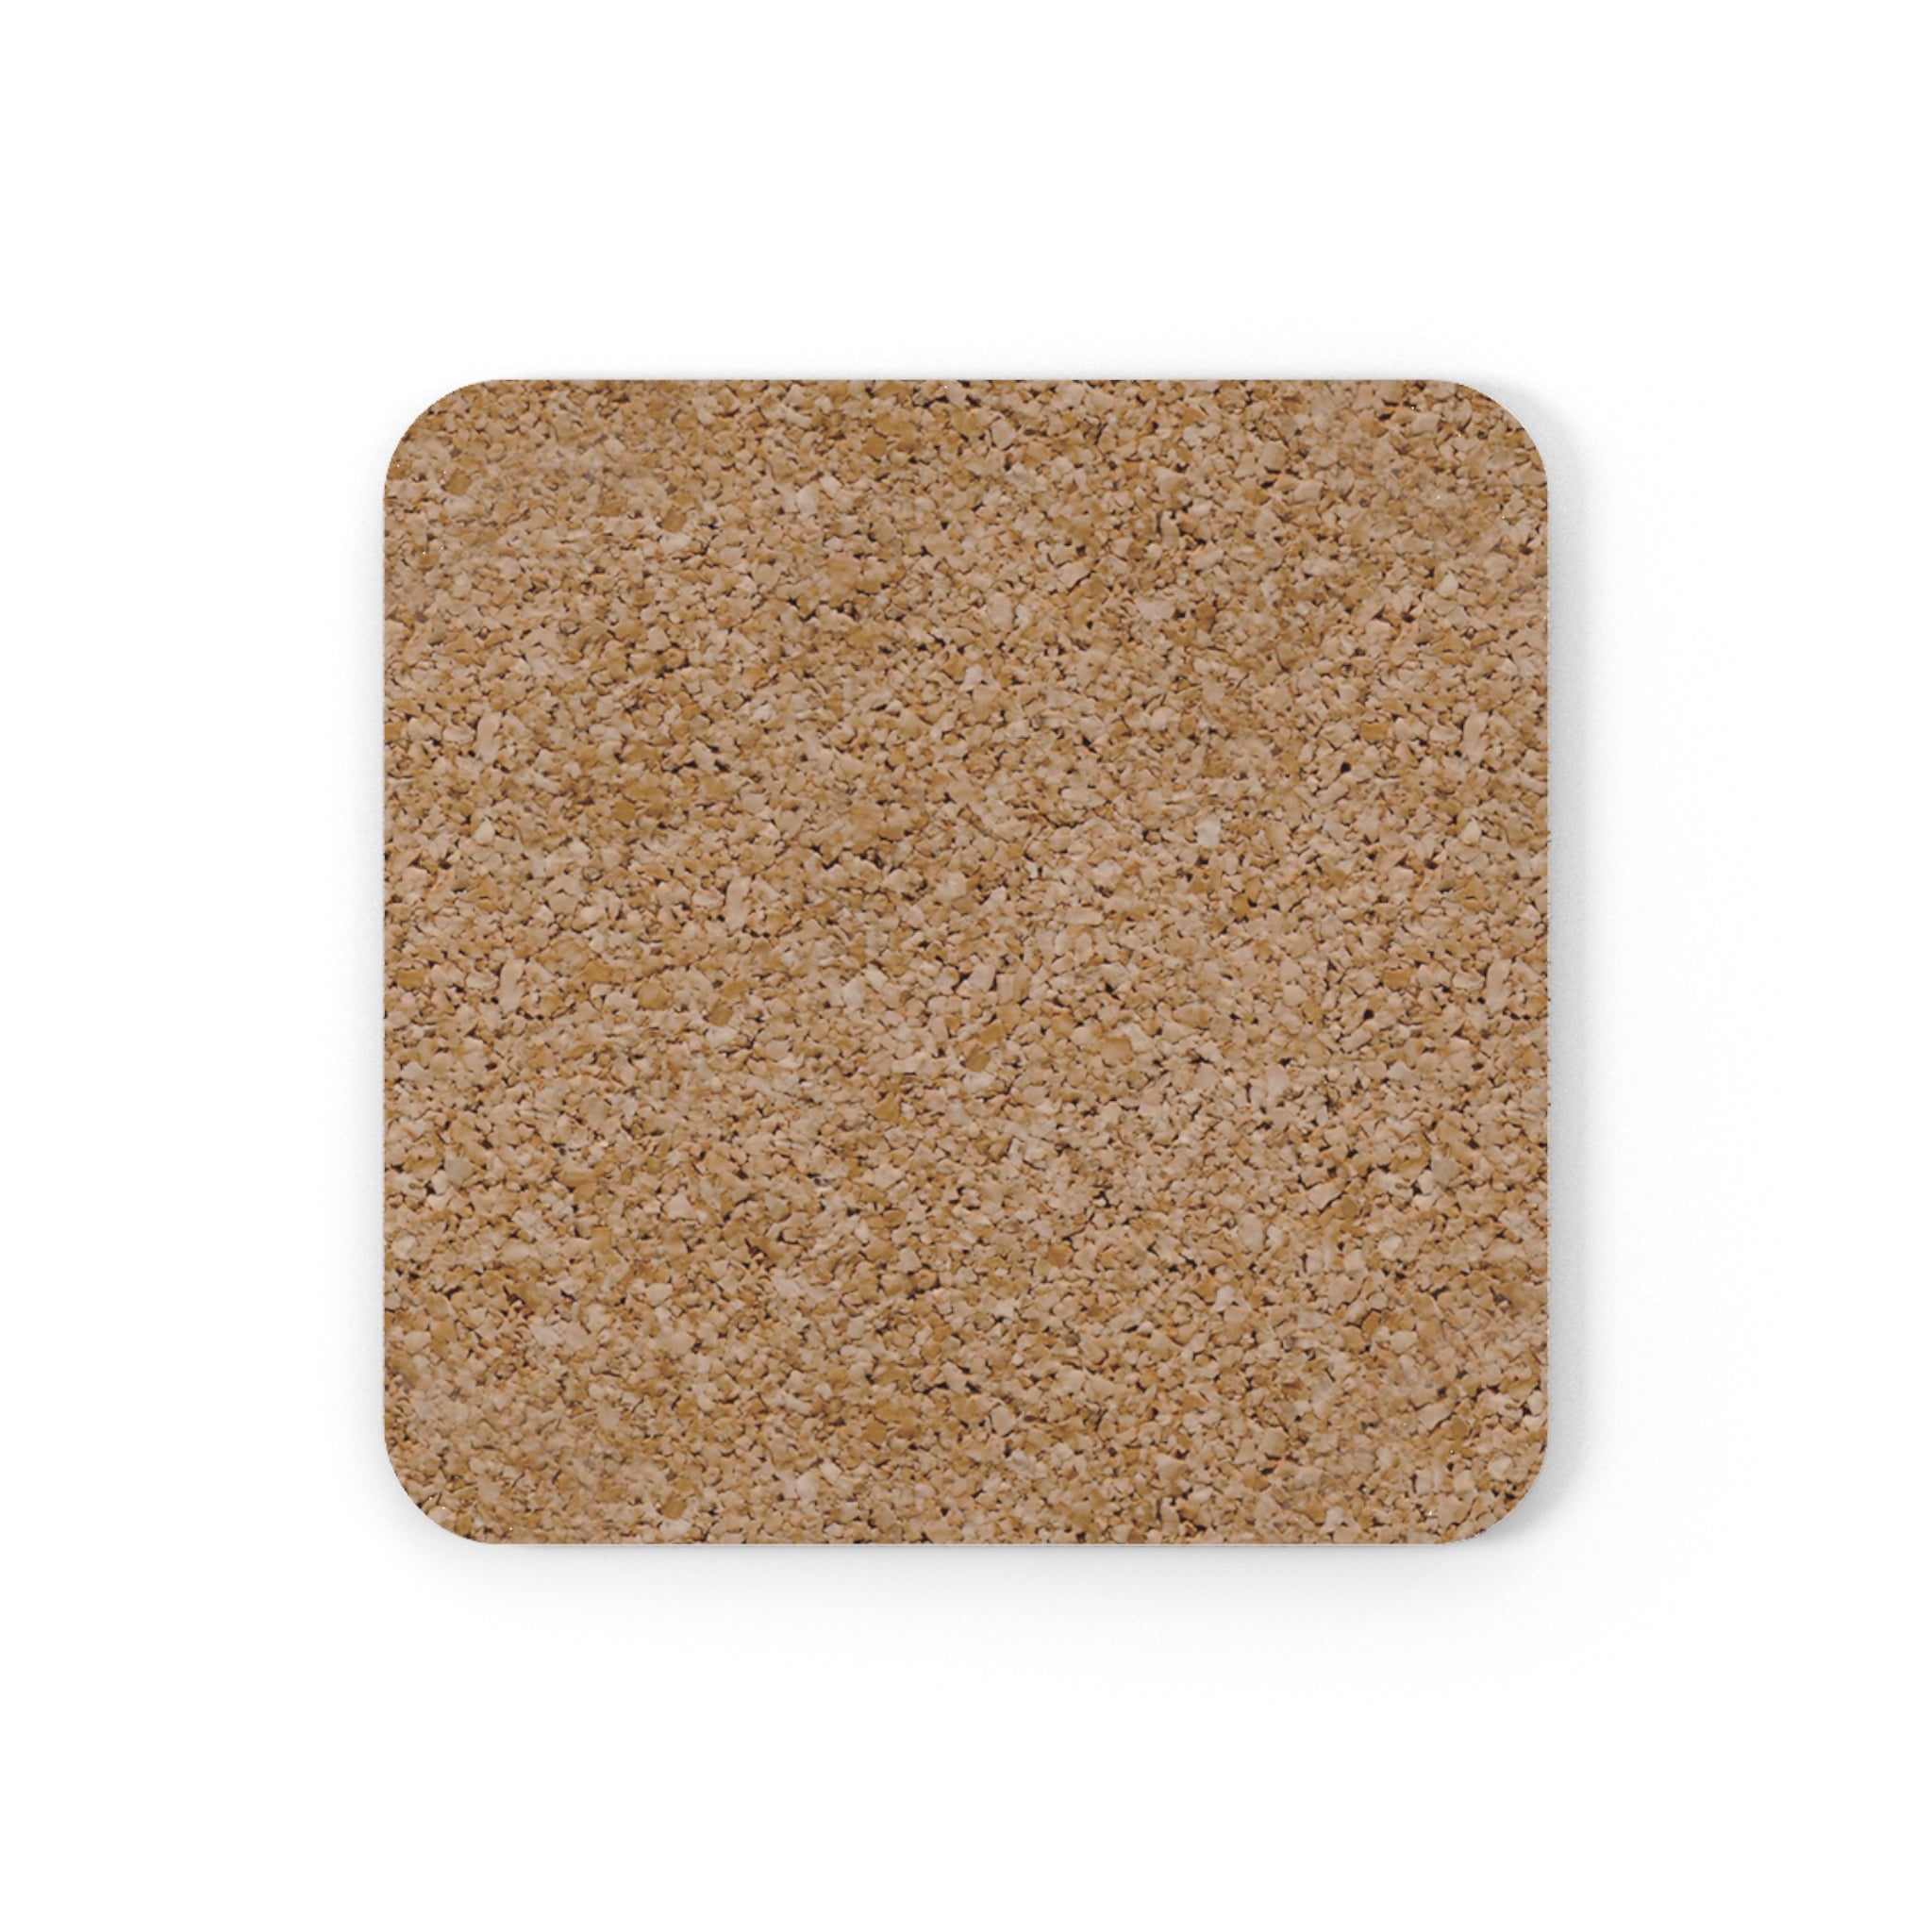 Cameron Creations - Surface Of The Sun - Stylish Coffee Coaster - Square Back